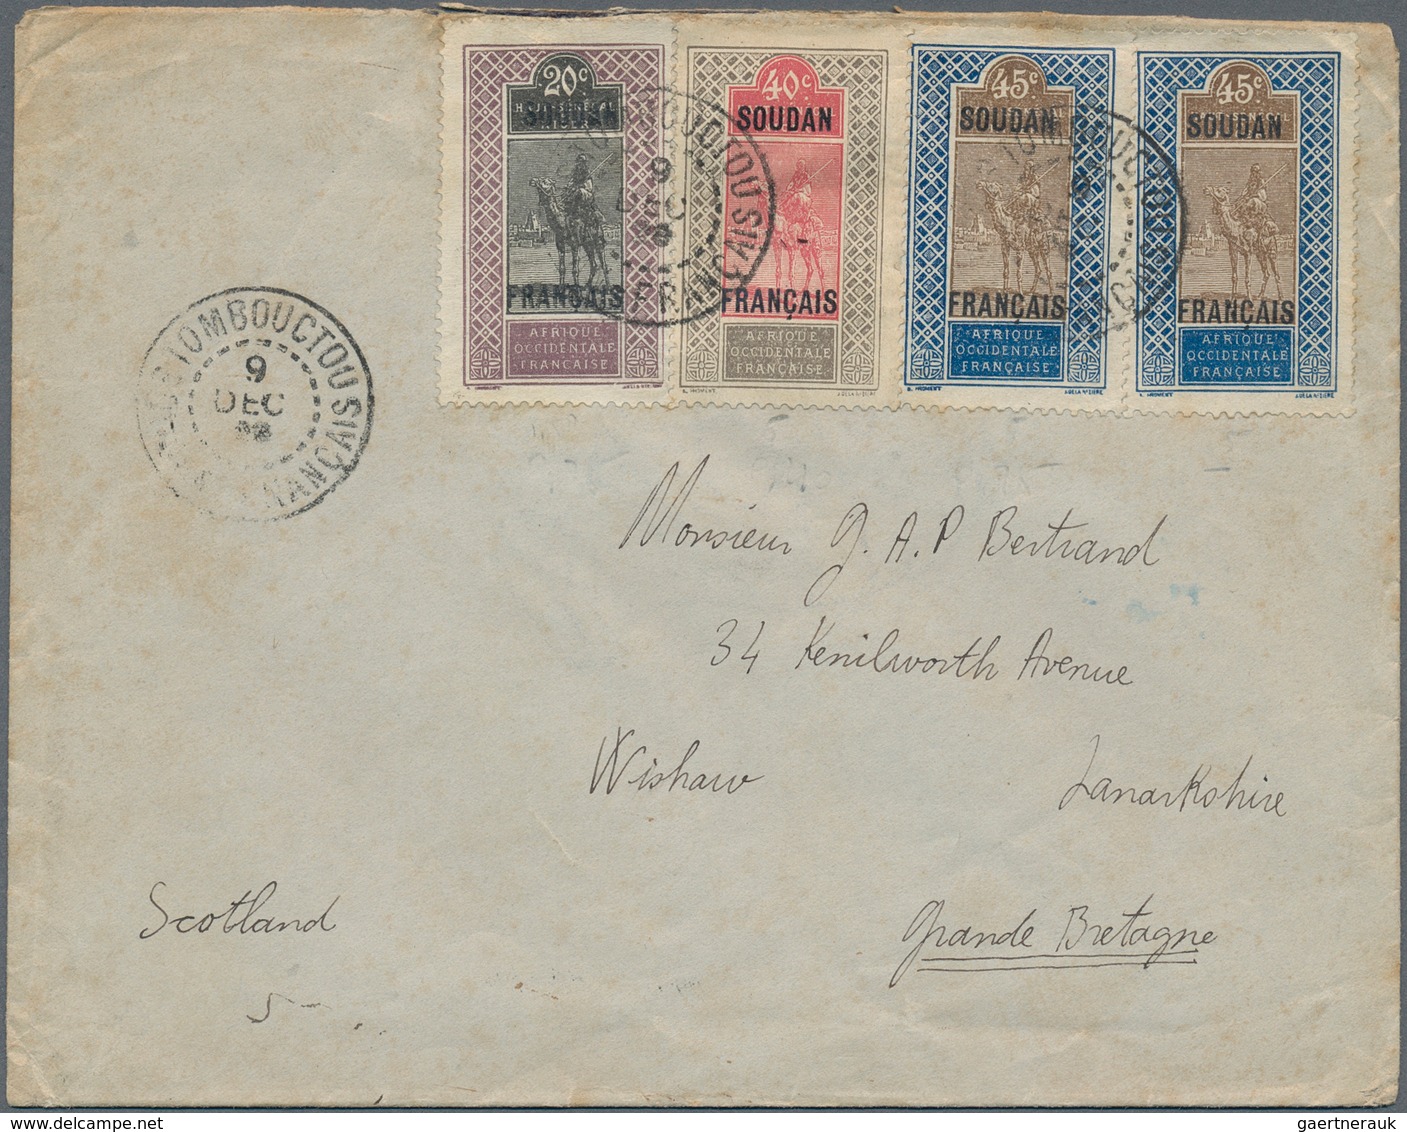 Französische Kolonien: 1900/2000 (ca.), mainly colonial period up to 1950s, holding of apprx. 680 co